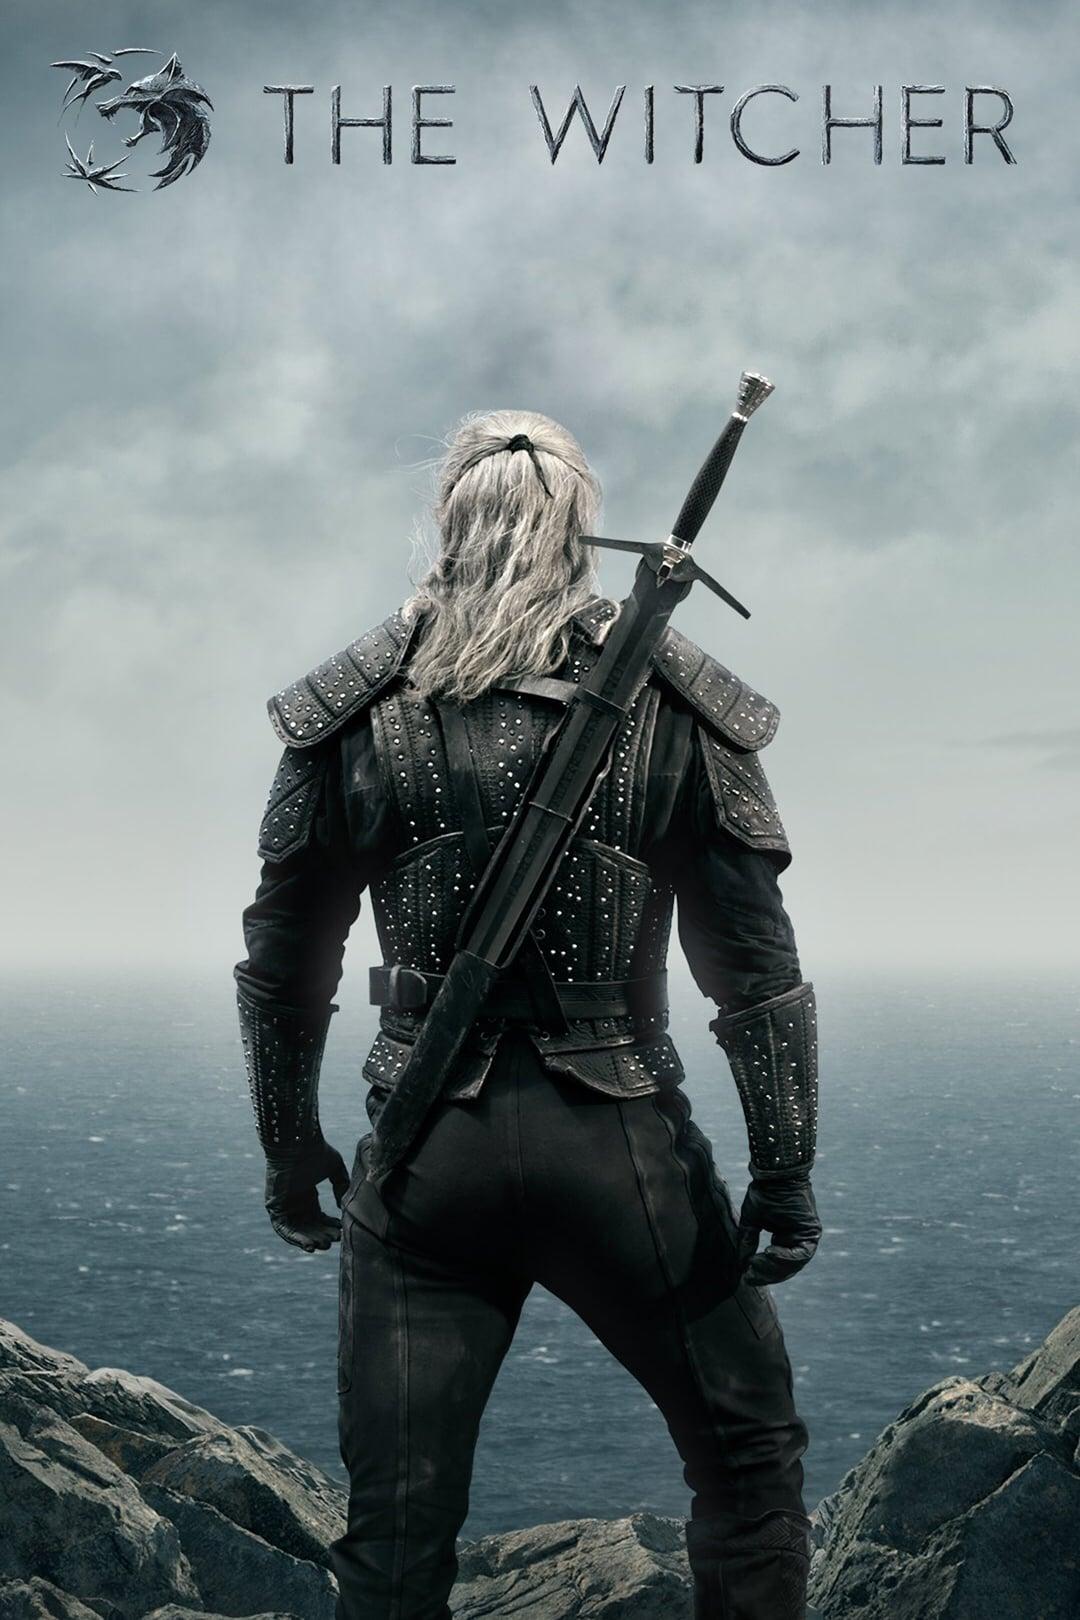 The Witcher poster